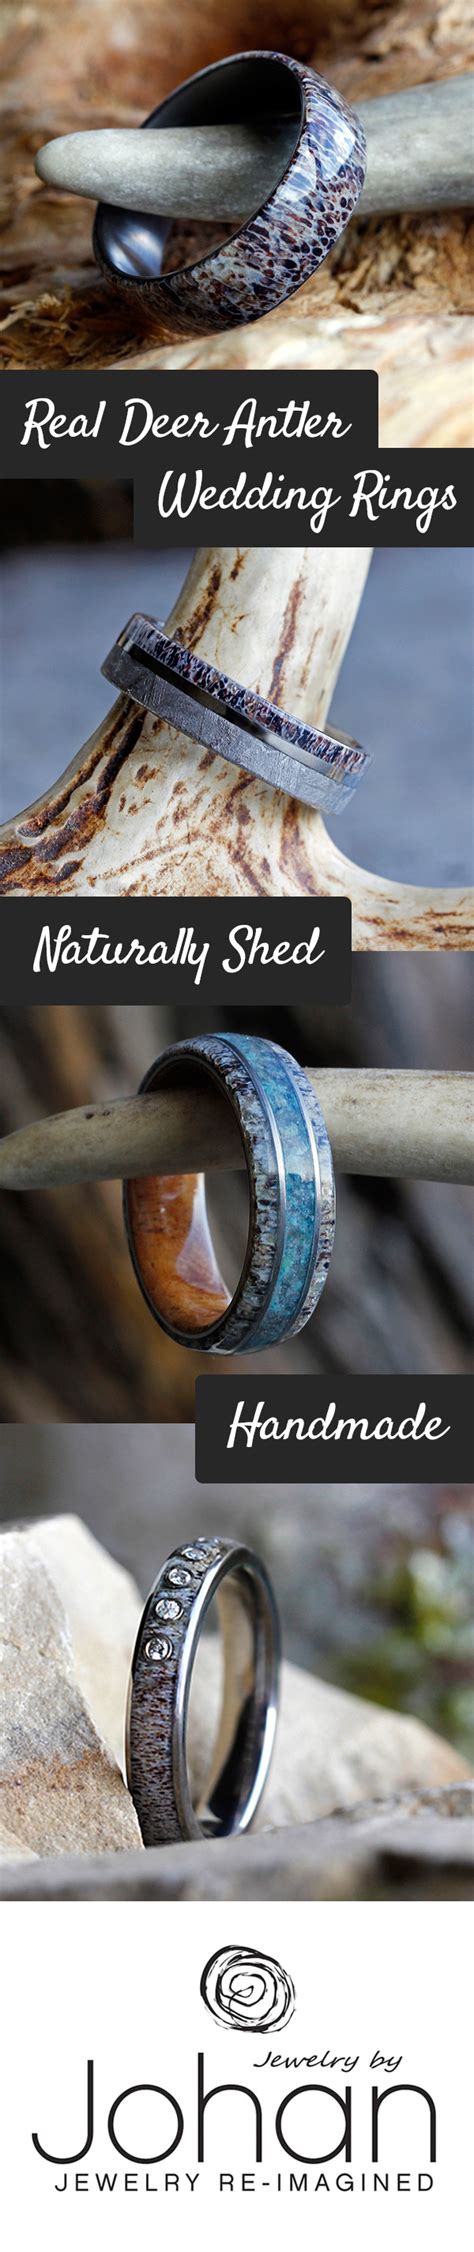 Collects data on the user's navigation and behavior on the website. Real Deer Antler Wedding Rings, Wedding Bands, and Antler ...